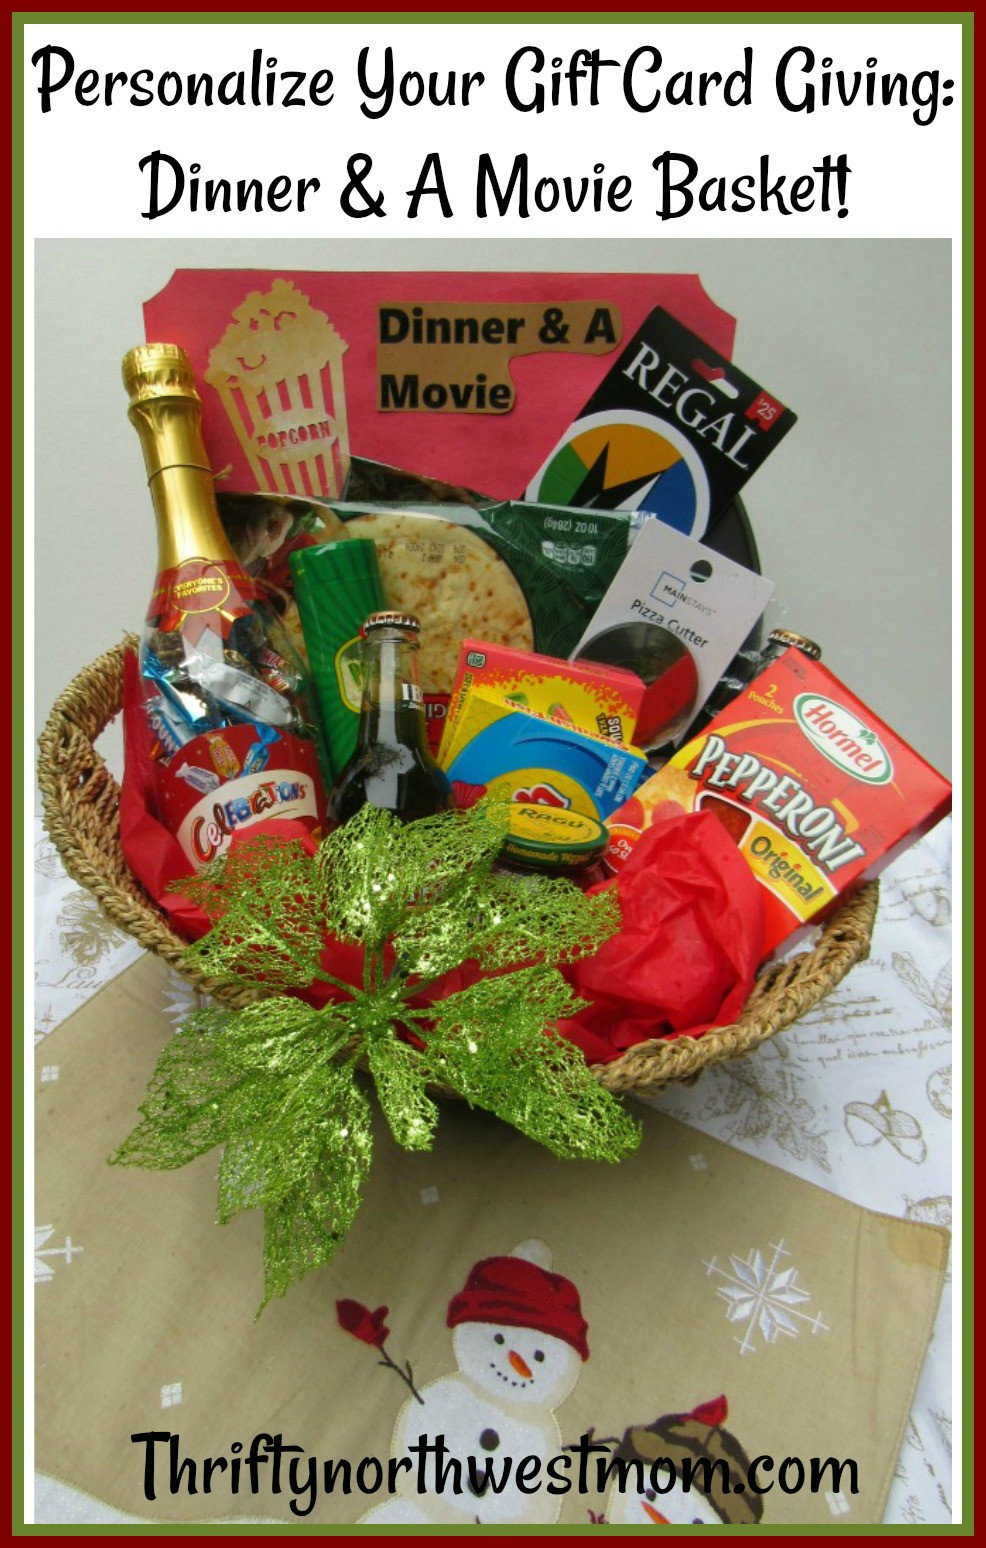 Dinner Gift Basket Ideas
 Dinner & A Movie Gift Basket Idea How to Personalize